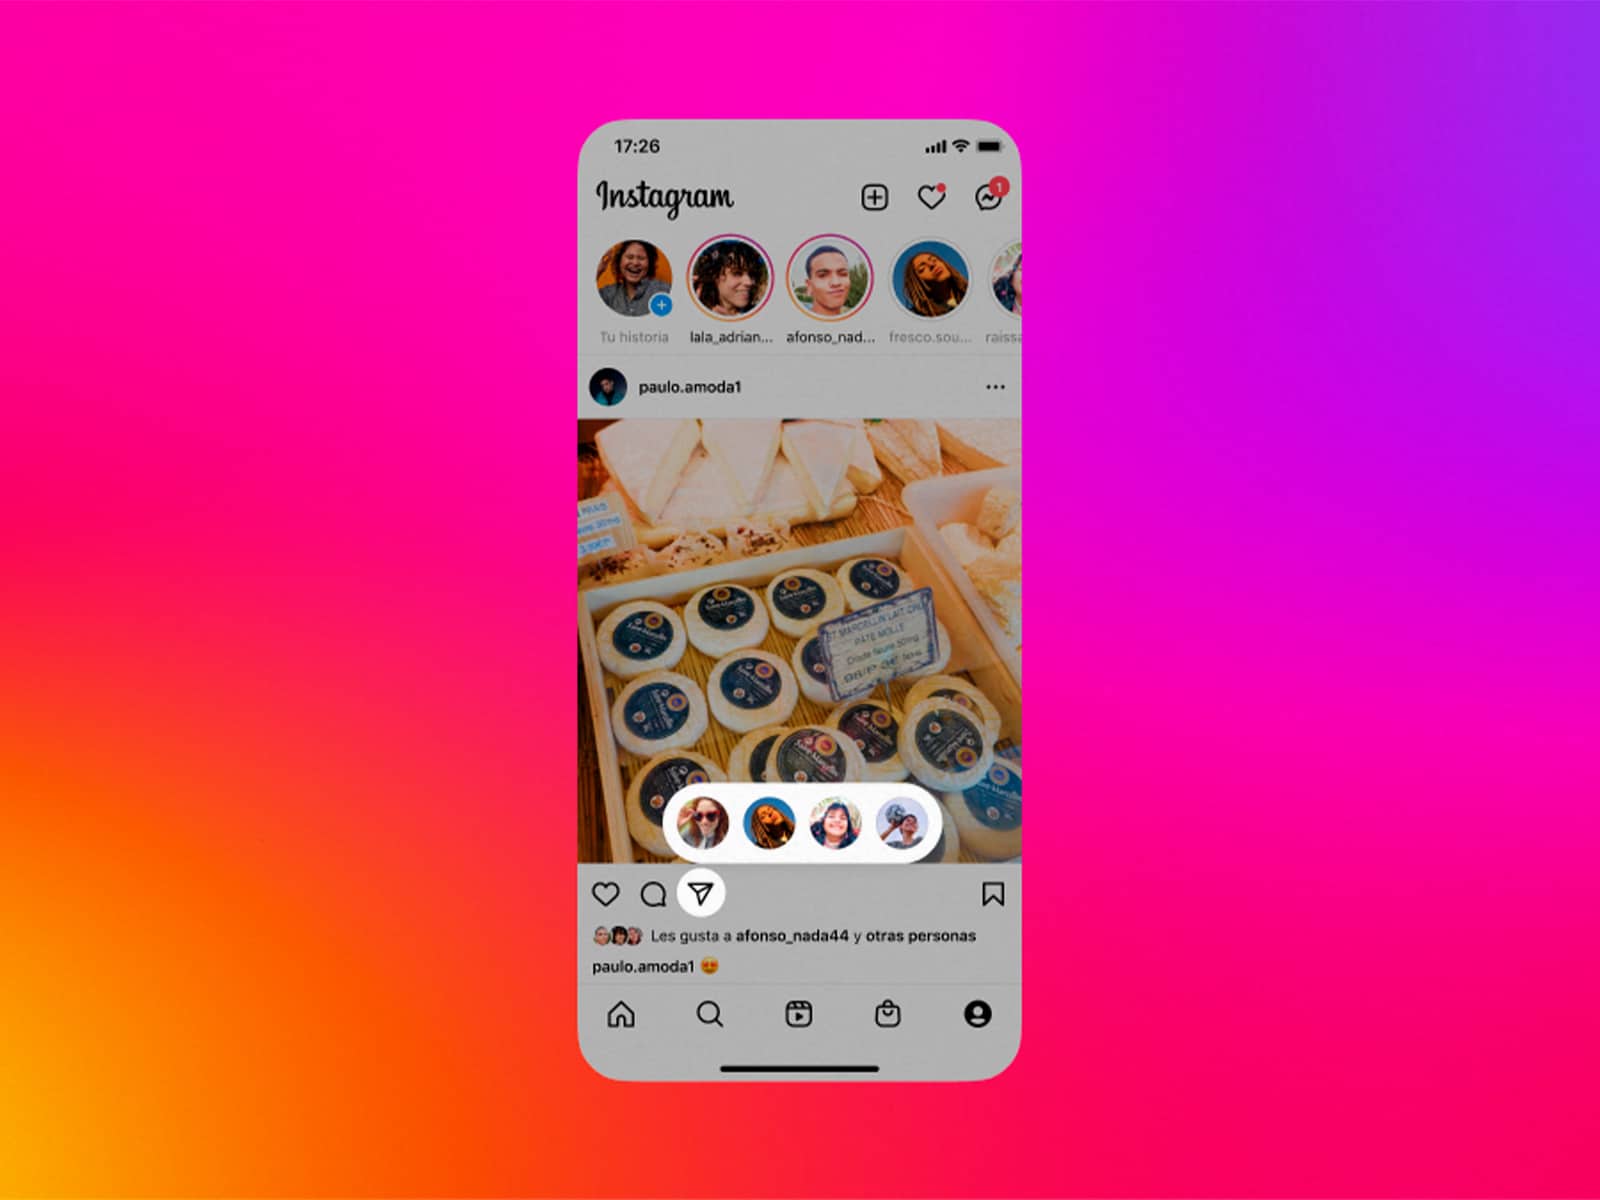 These are the new features that Instagram has included in its direct messages